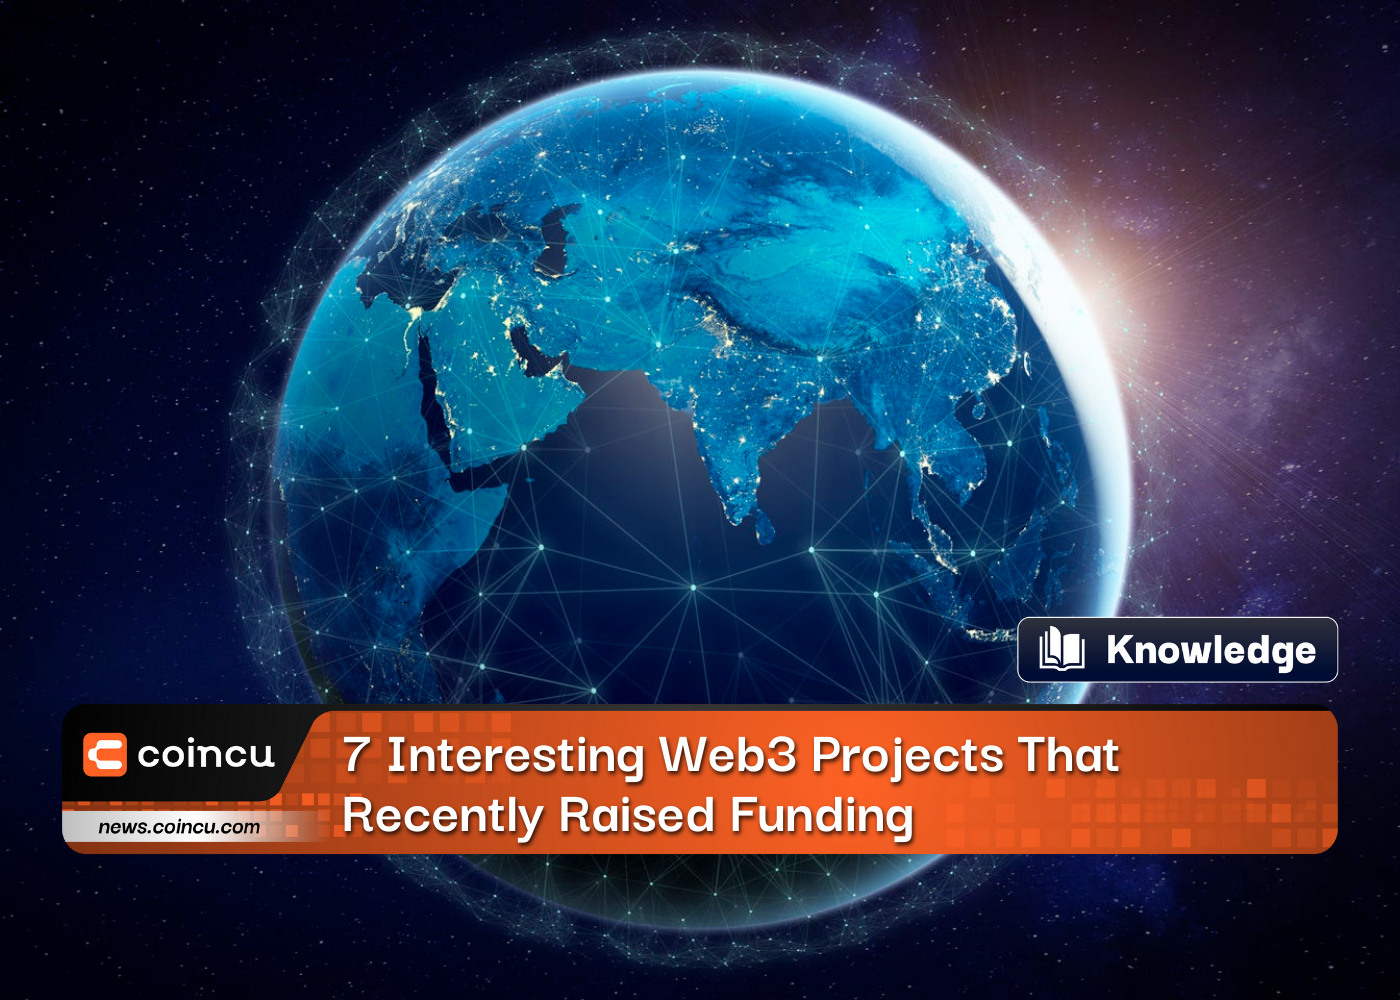 7 Interesting Web3 Projects That Recently Raised Funding